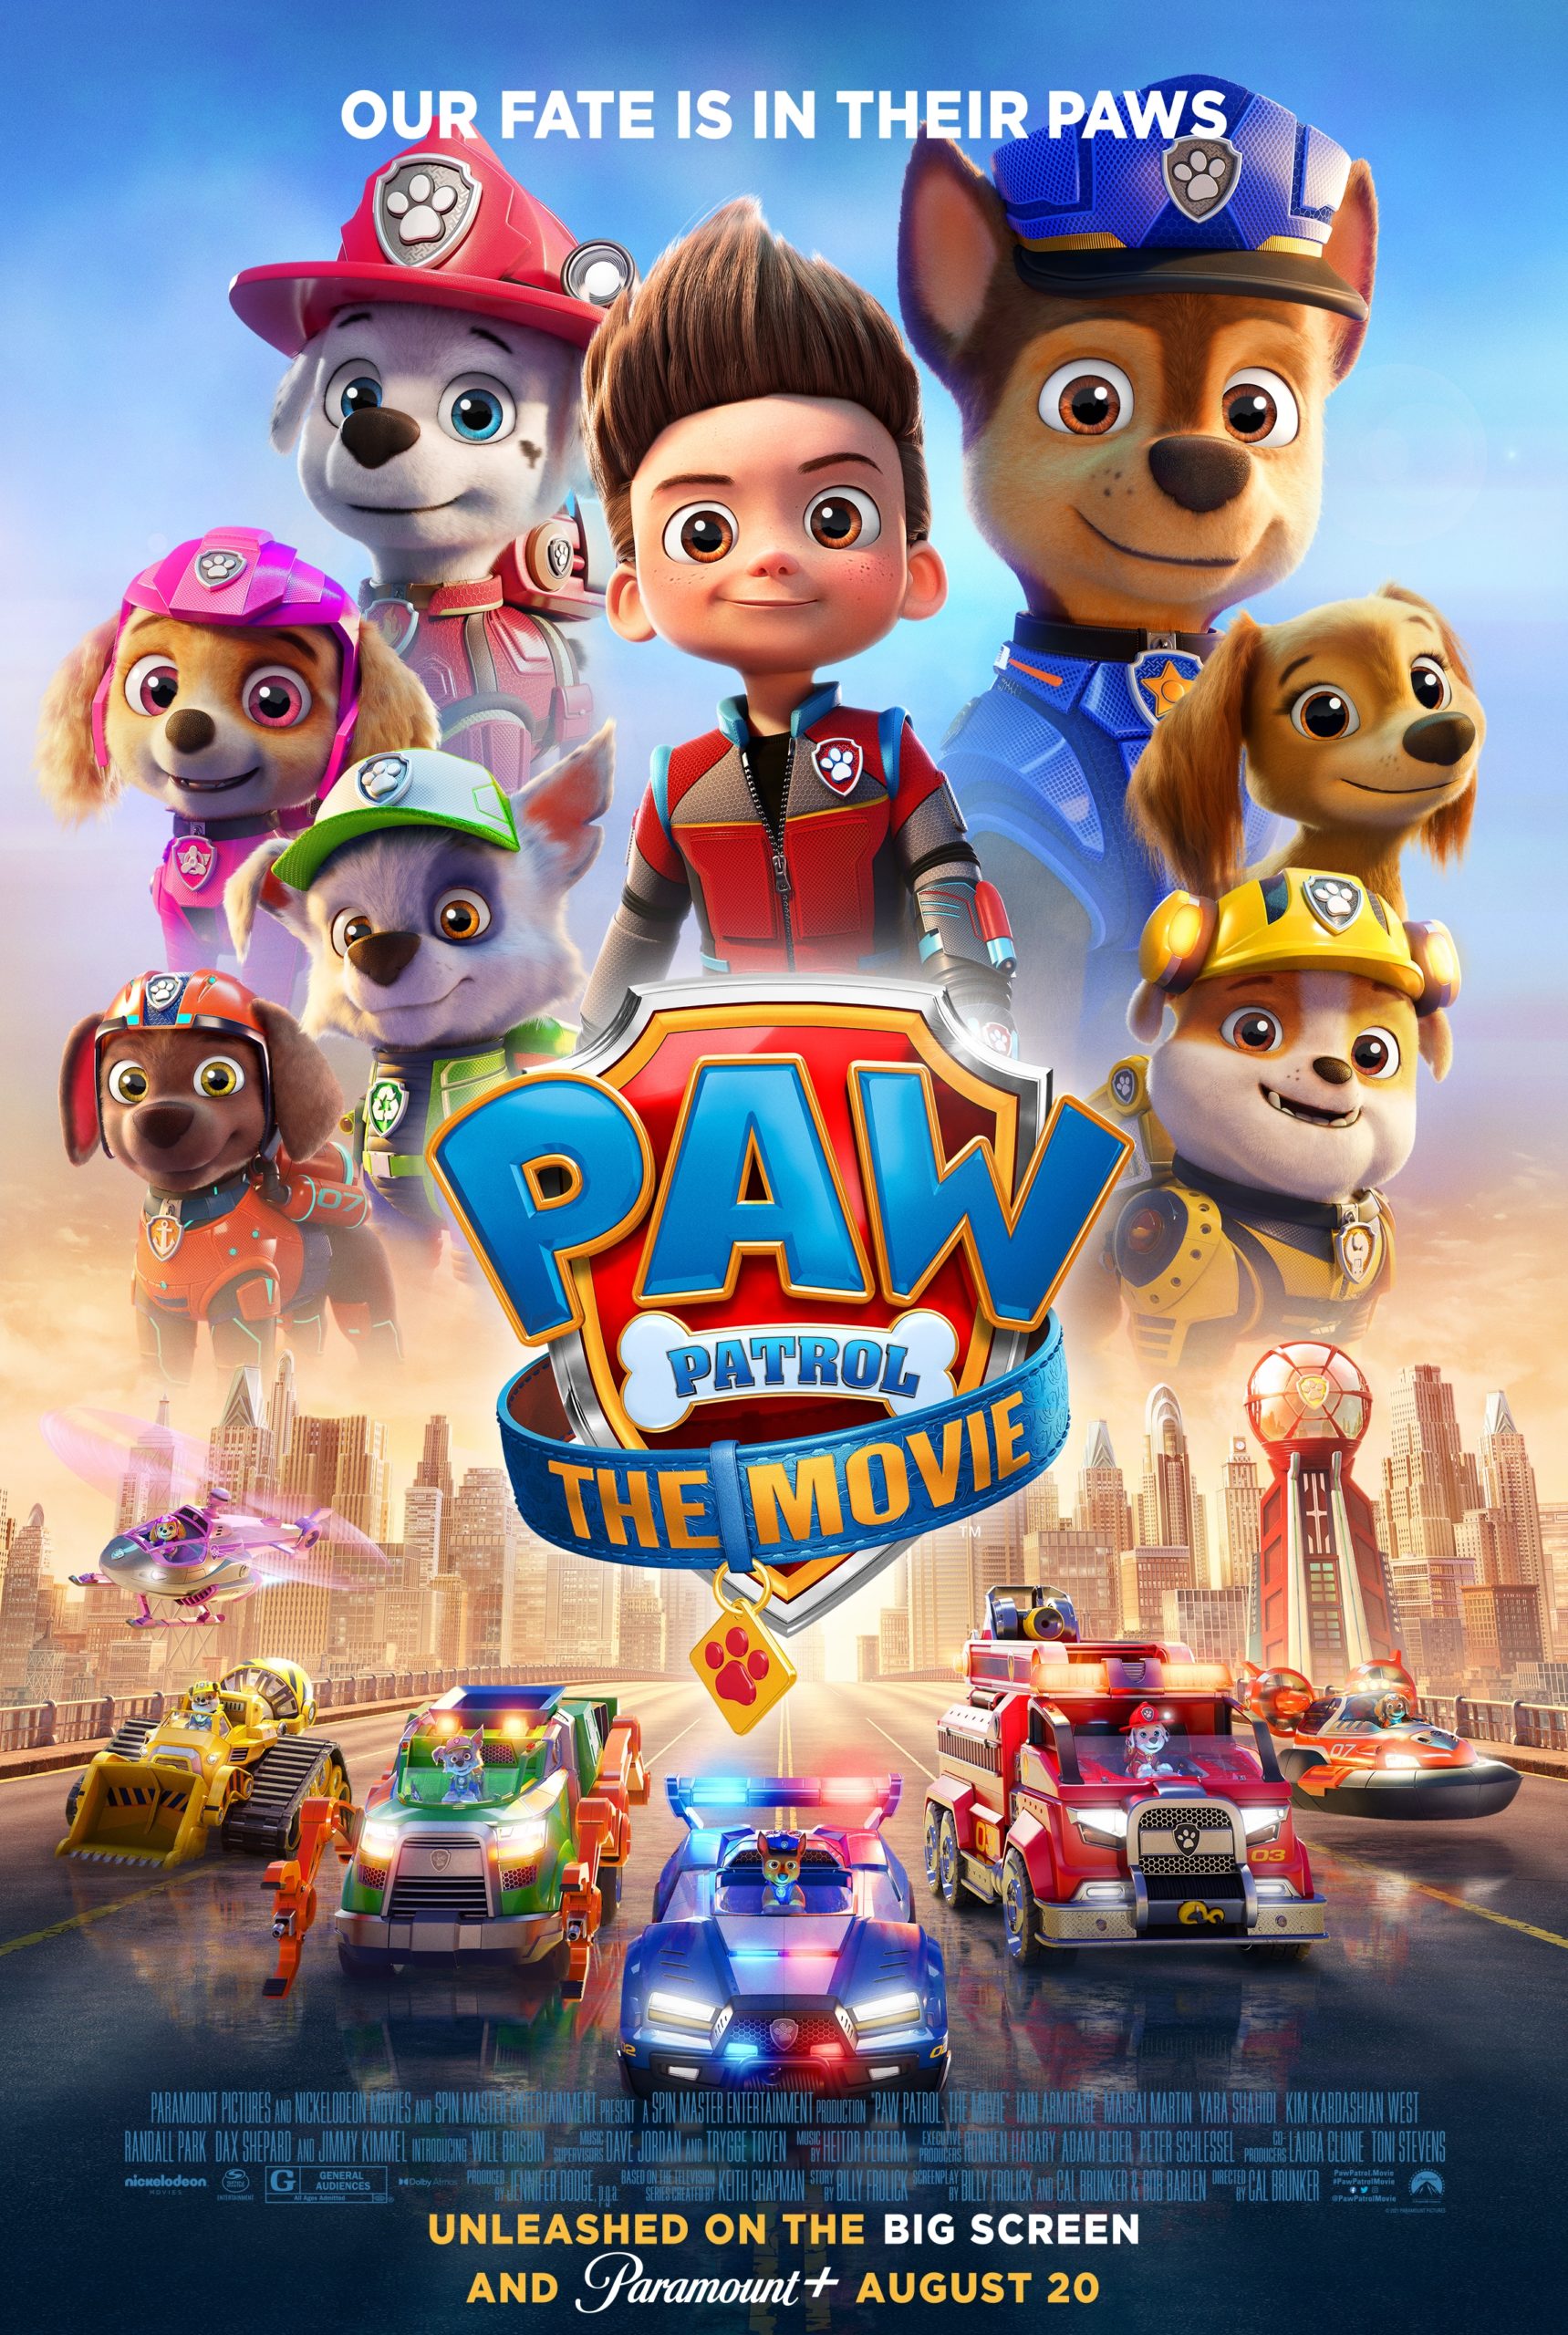 PAW PATROL THE MOVIE Arrives In Theatres and Streaming on Paramount+